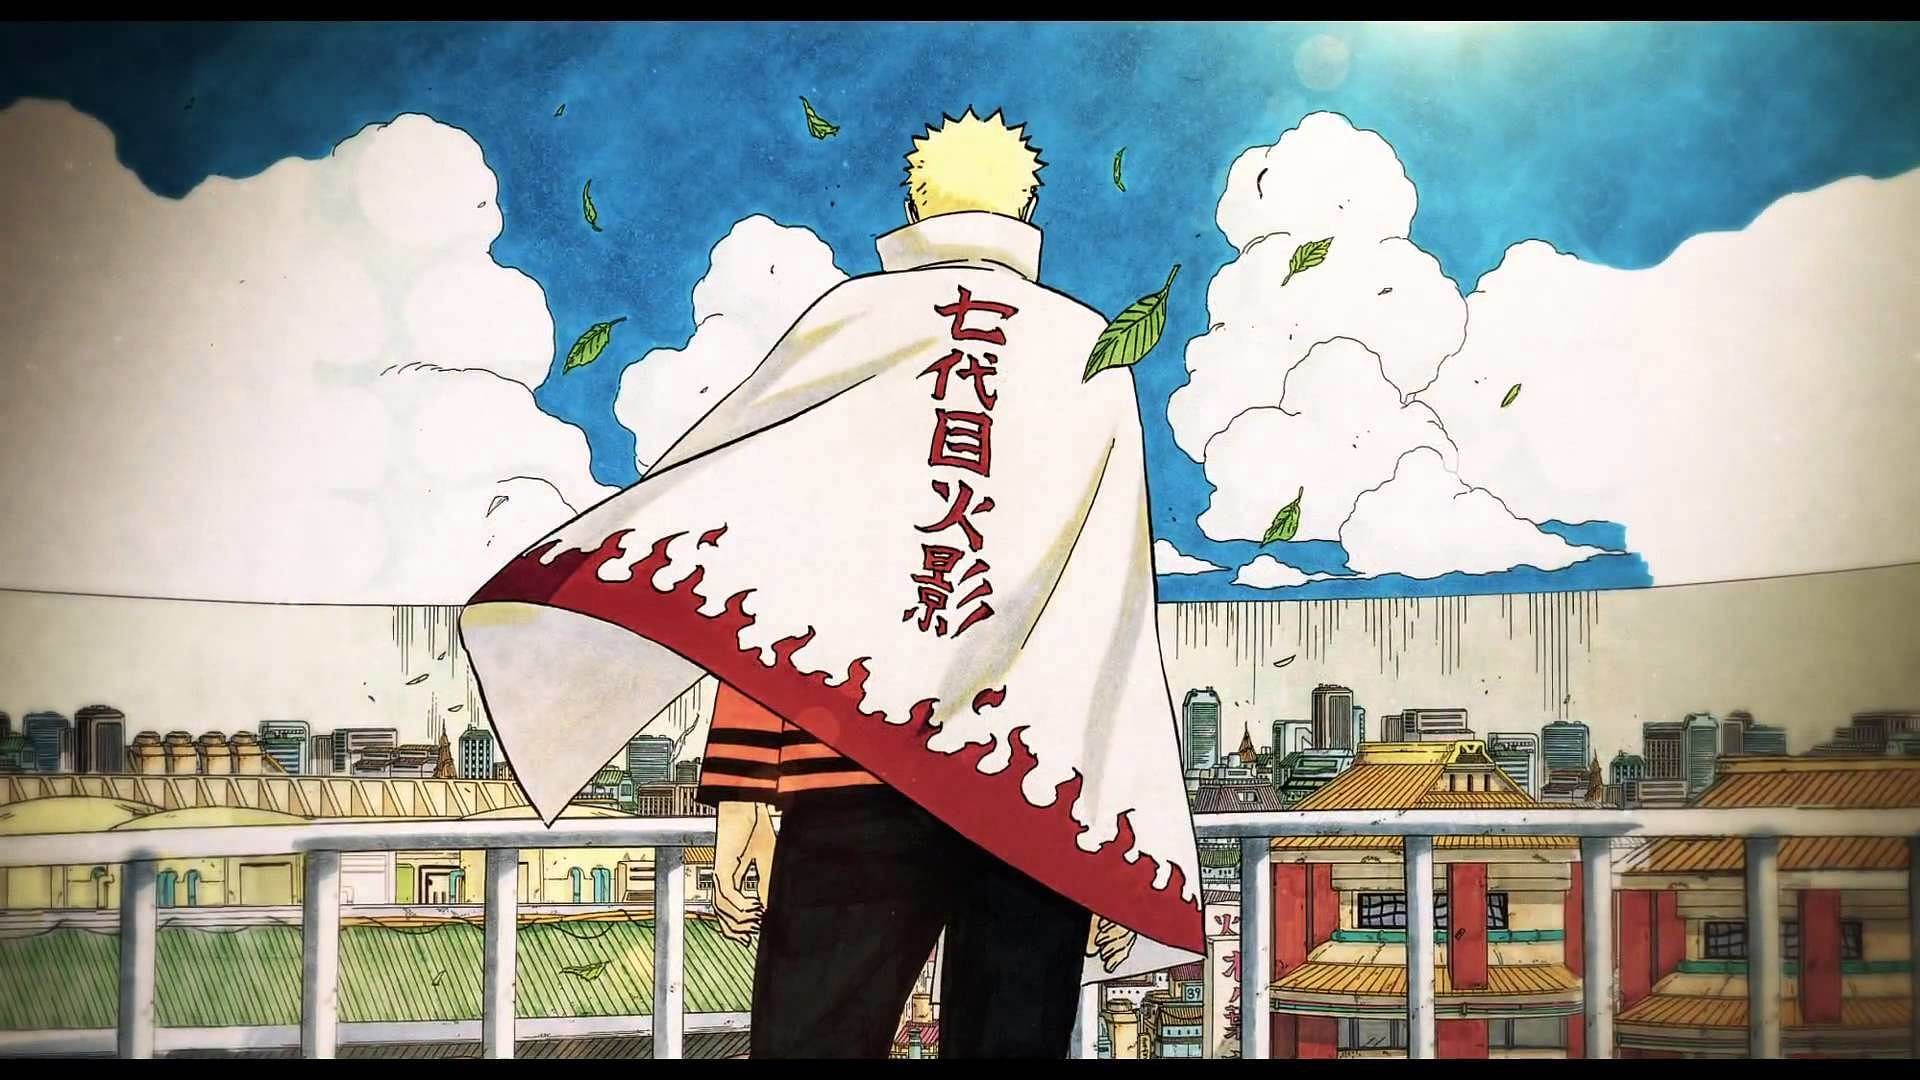 10 anime you should watch if you loved Naruto